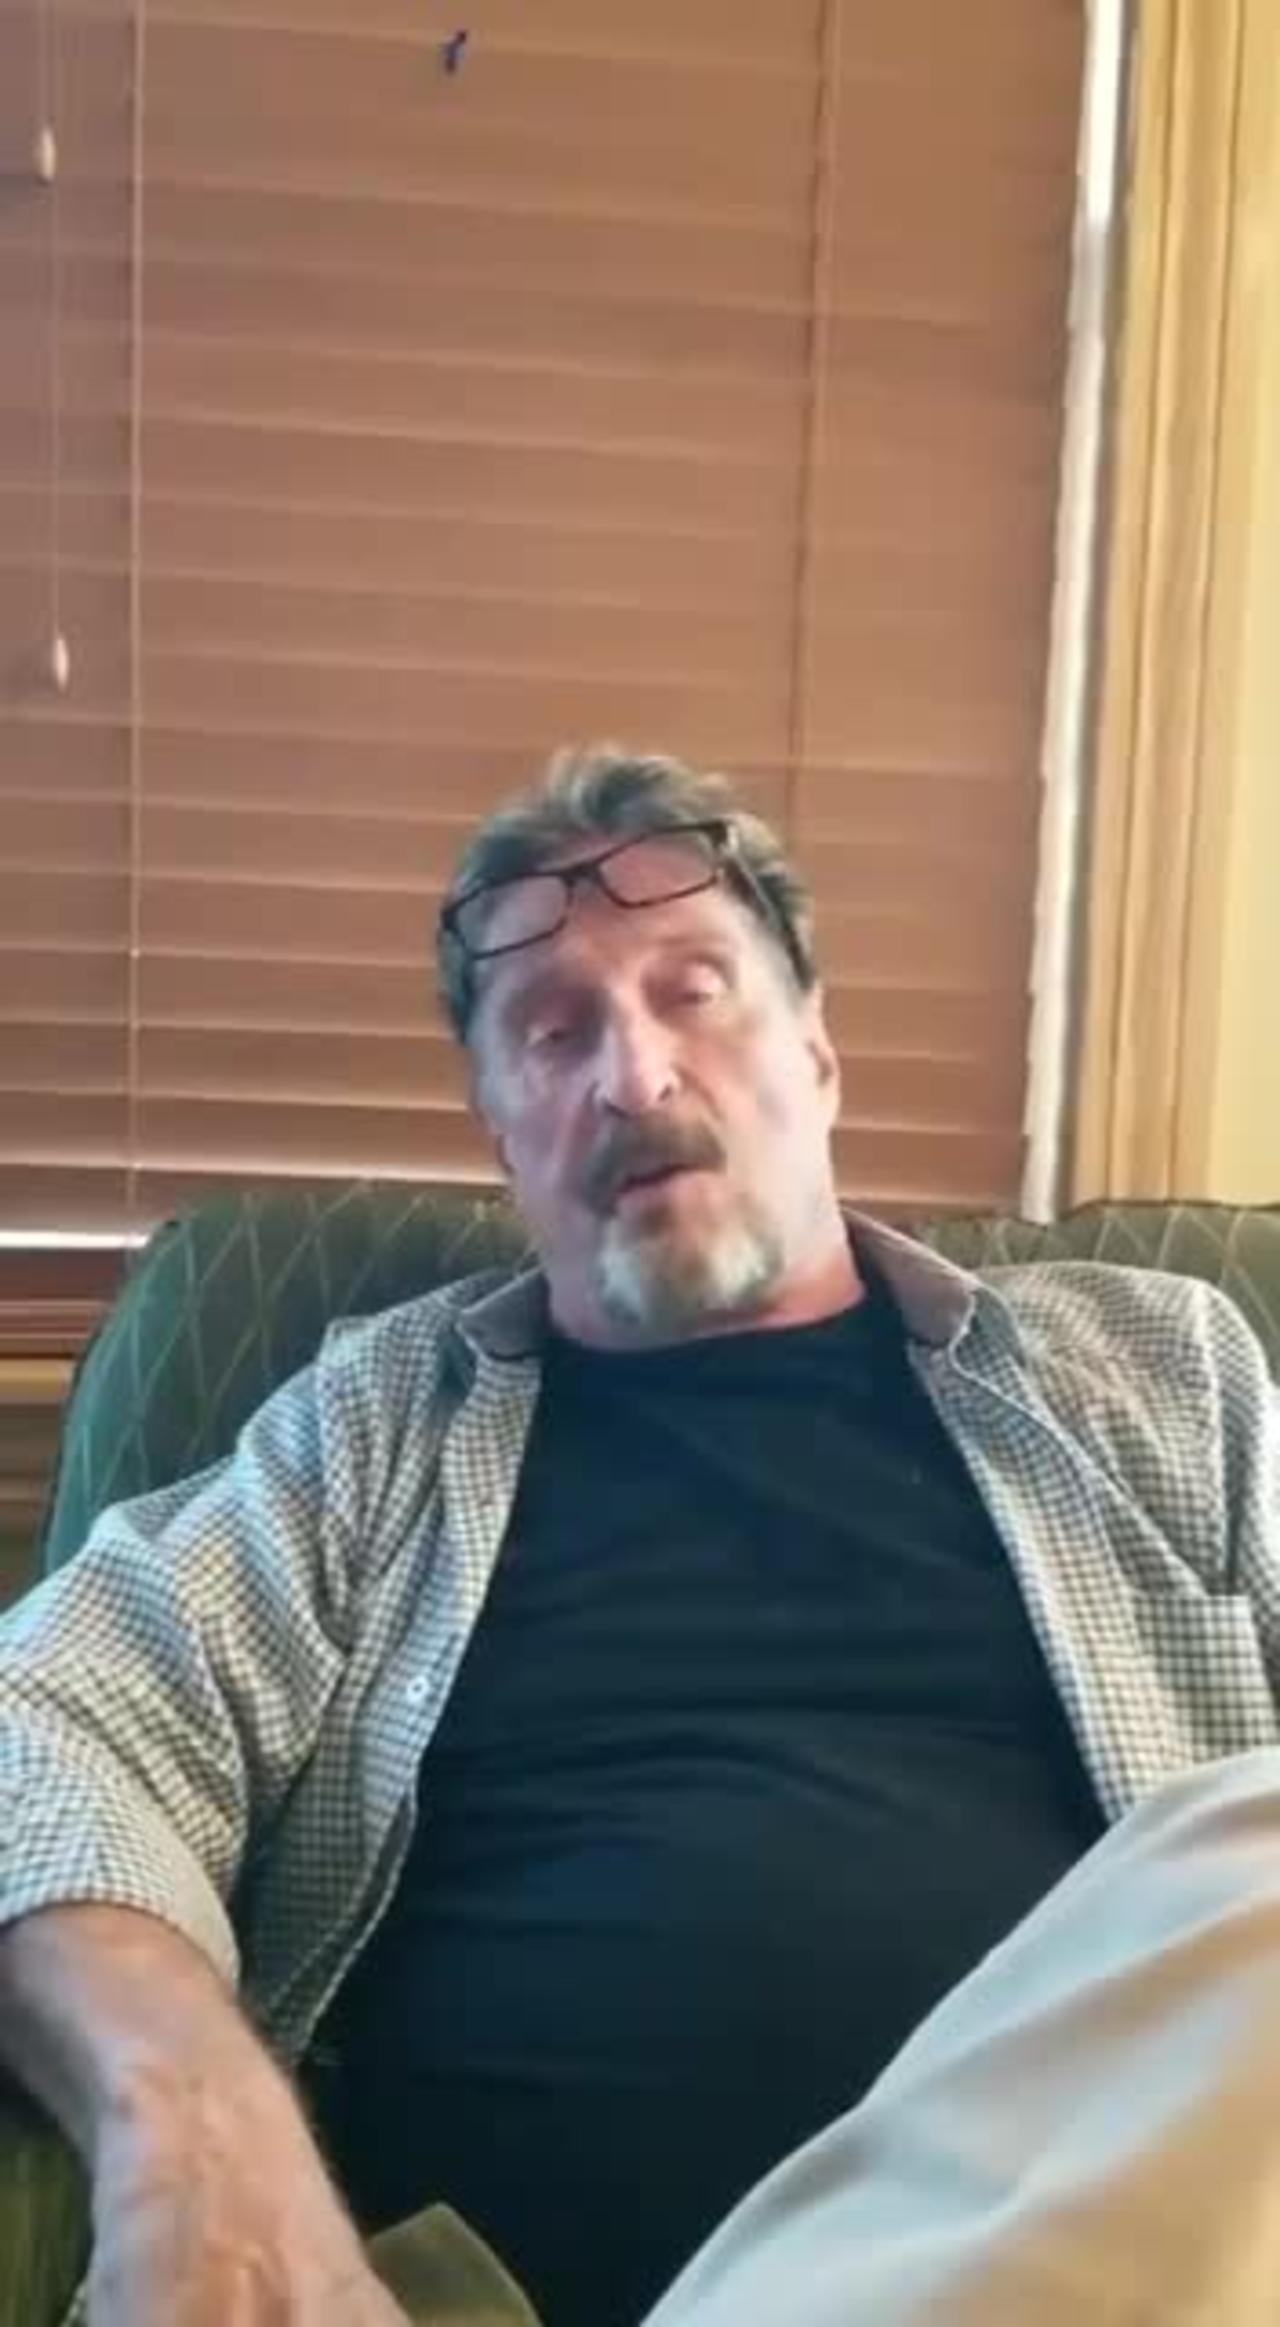 John McAfee - FREE Ourselves from the CURRENT SLAVE SYSTEM